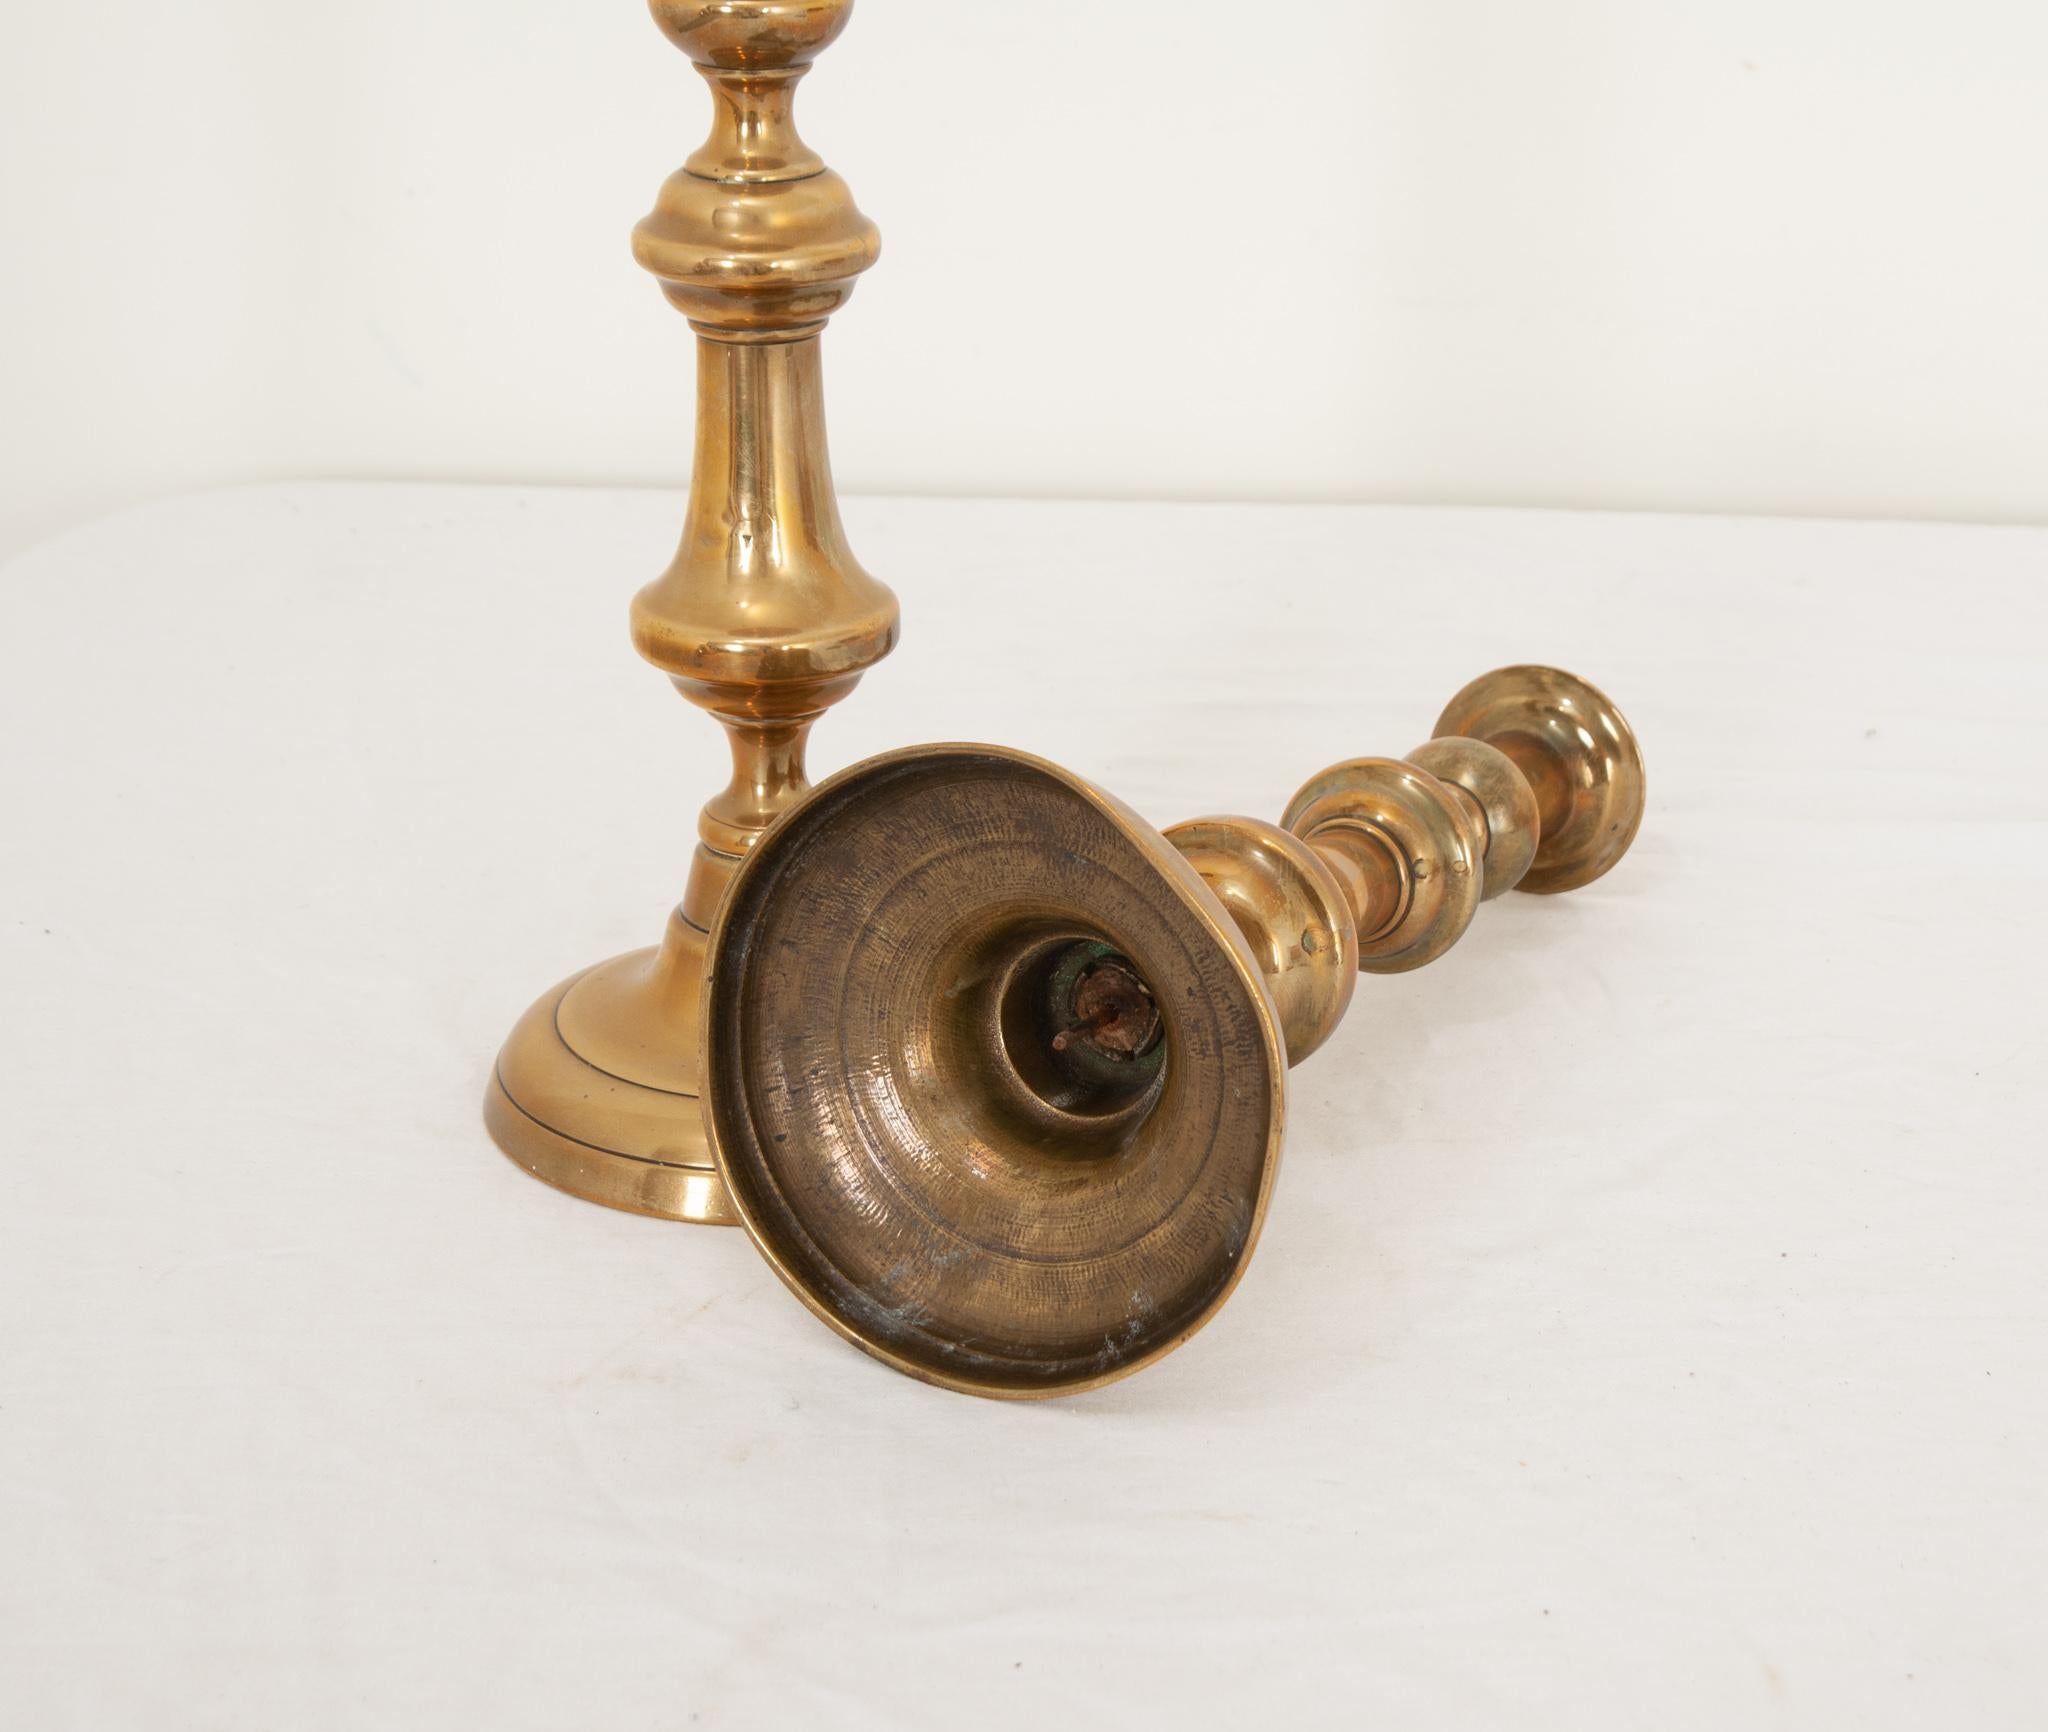 Pair of Antique Brass Candlesticks In Good Condition For Sale In Baton Rouge, LA